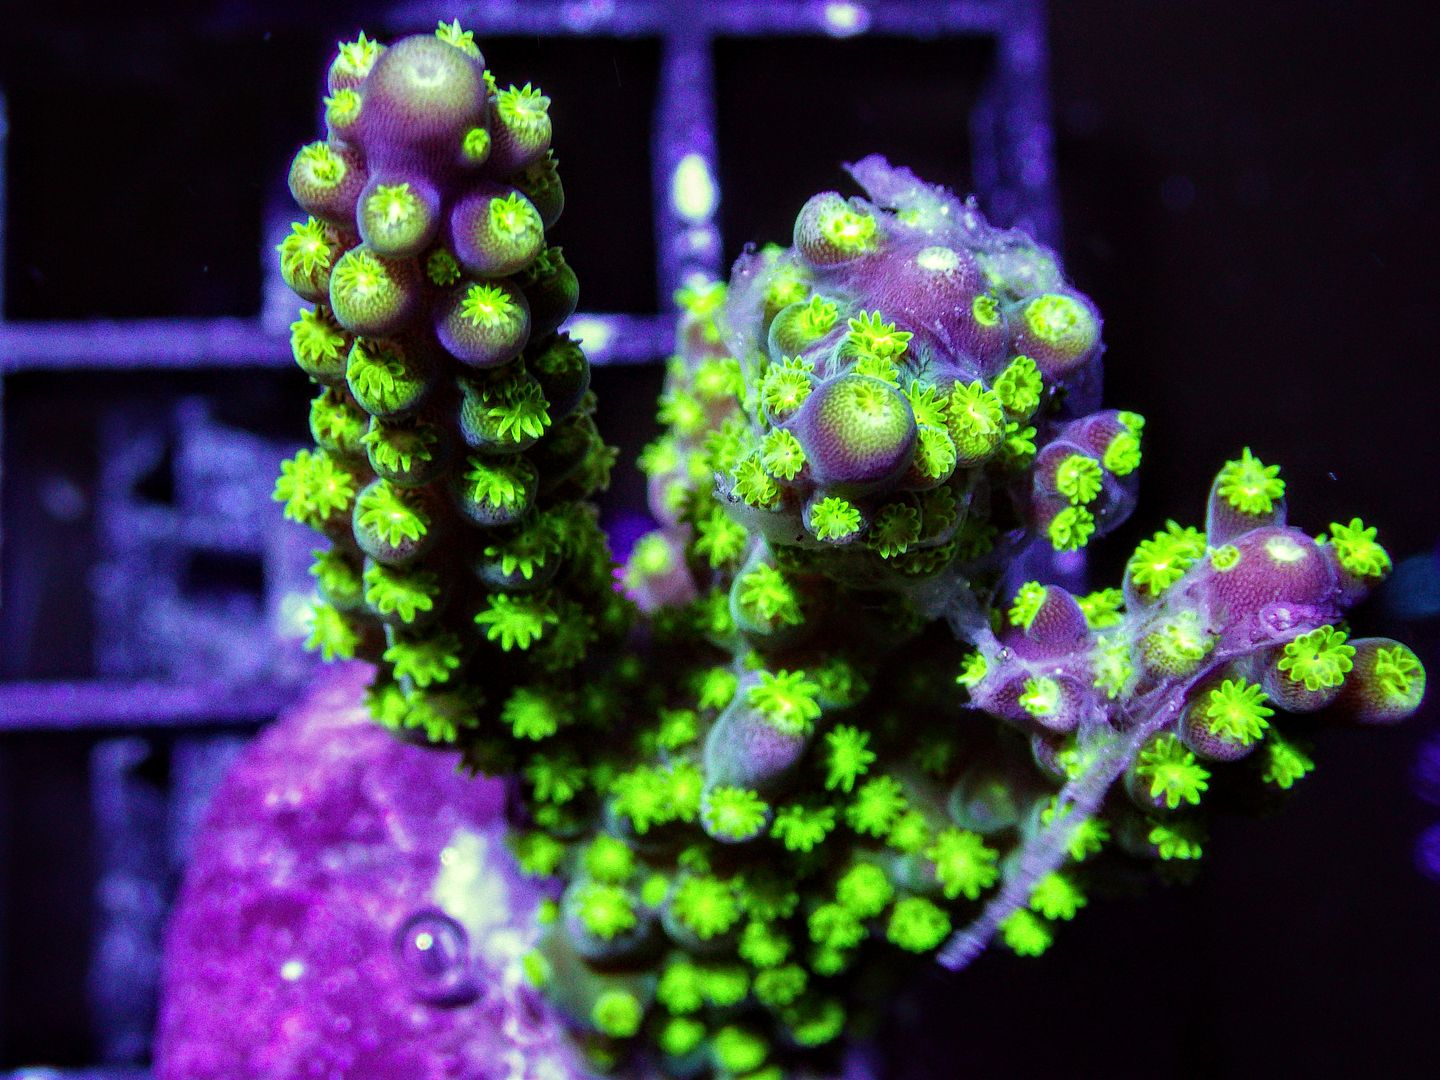 RIMG06972 zps3ltrn2bt - Chunky Frags posted on New Site